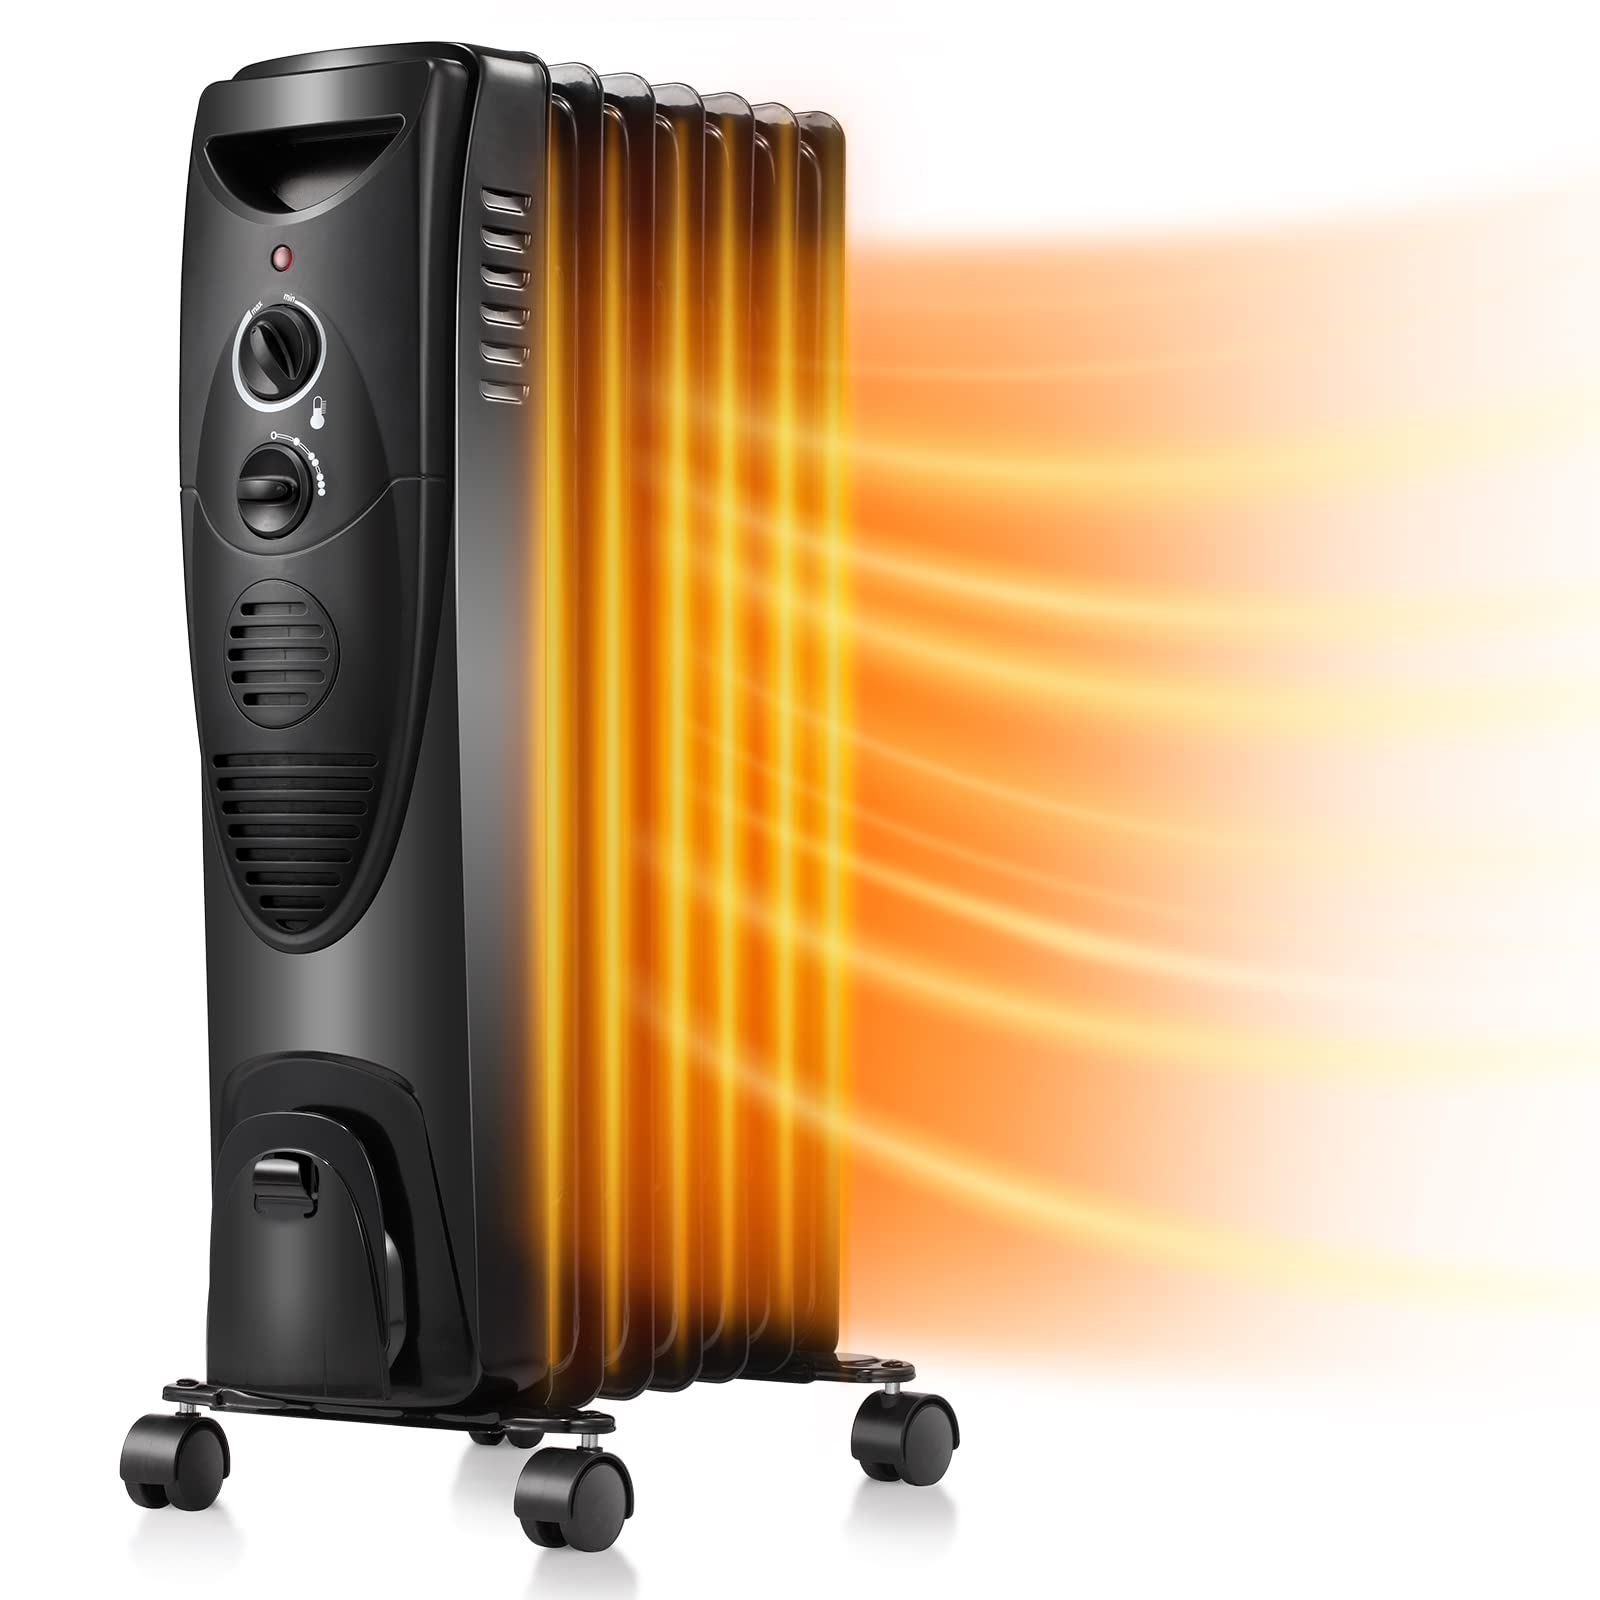 Kismile 1500W Oil Filled Radiator Heater, Portable Electric Heater With 3 Heat Settings, Adjustable Thermostat, Overheat & Tip-O